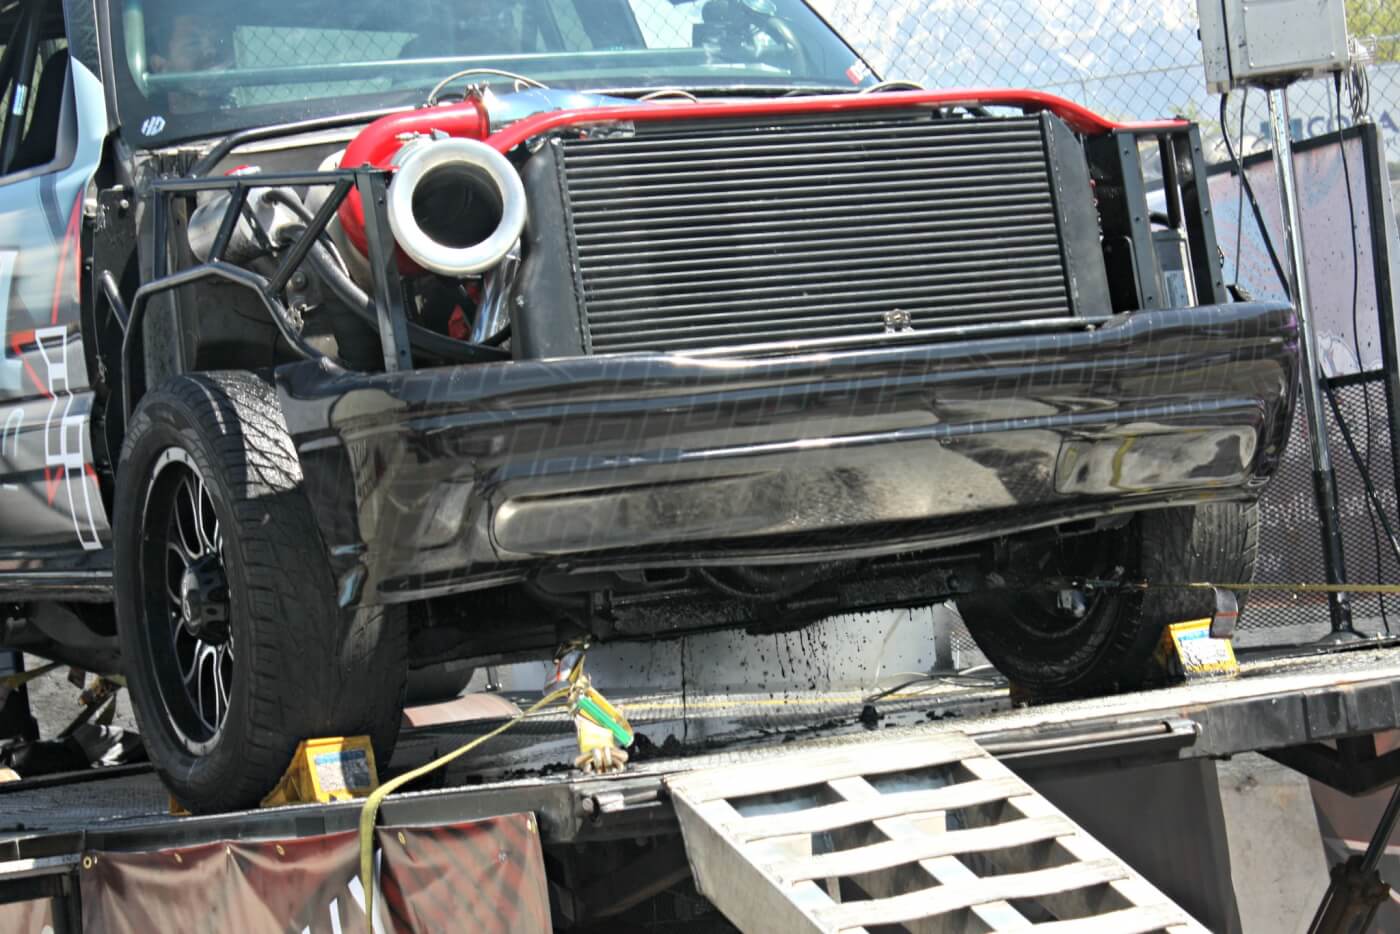 After dozens of 1500+ horsepower runs on the dyno, multiple 9-second passes at the track, and who knows how much nitrous, the billet connecting rods came apart, which led to a windowed engine block and the massive evacuation of the engines oil and coolant all over the dyno.